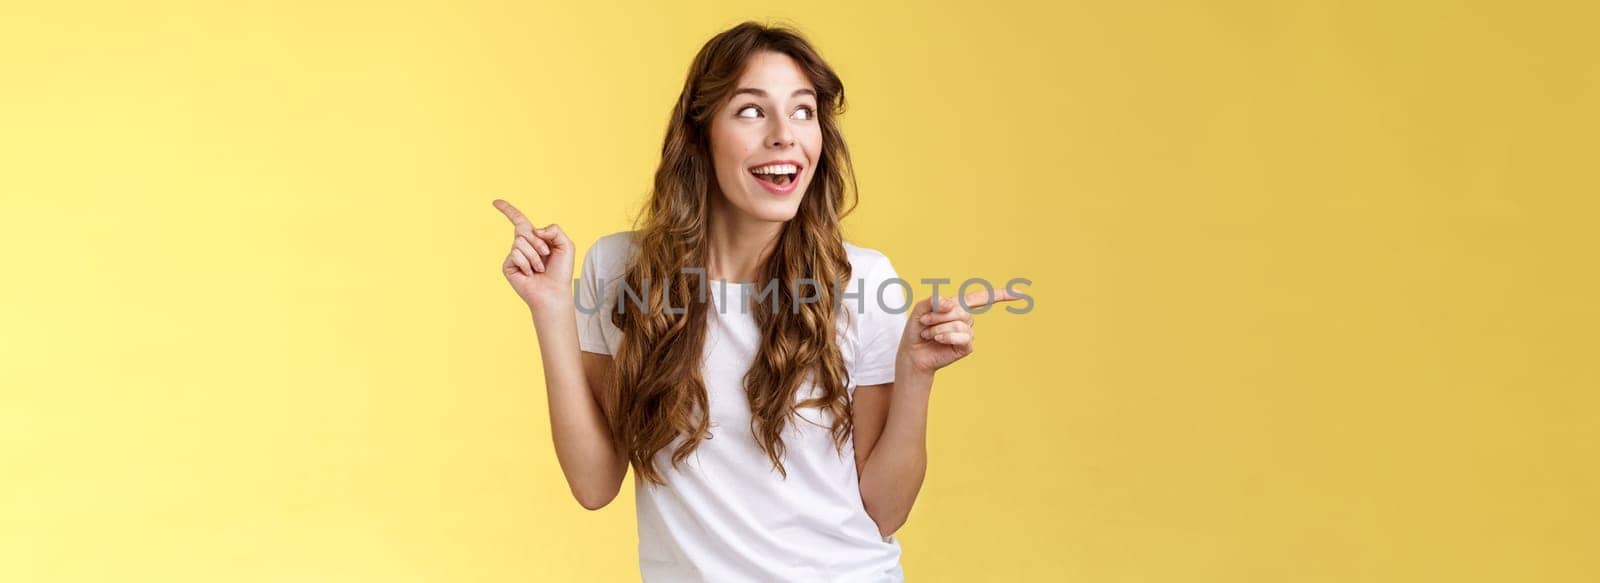 Amused cheerful smiling happy young curly-haired woman chestnut hair observe curiously copy space grinning admiration joy pointing sideways making choice impressed satisfied turn left.